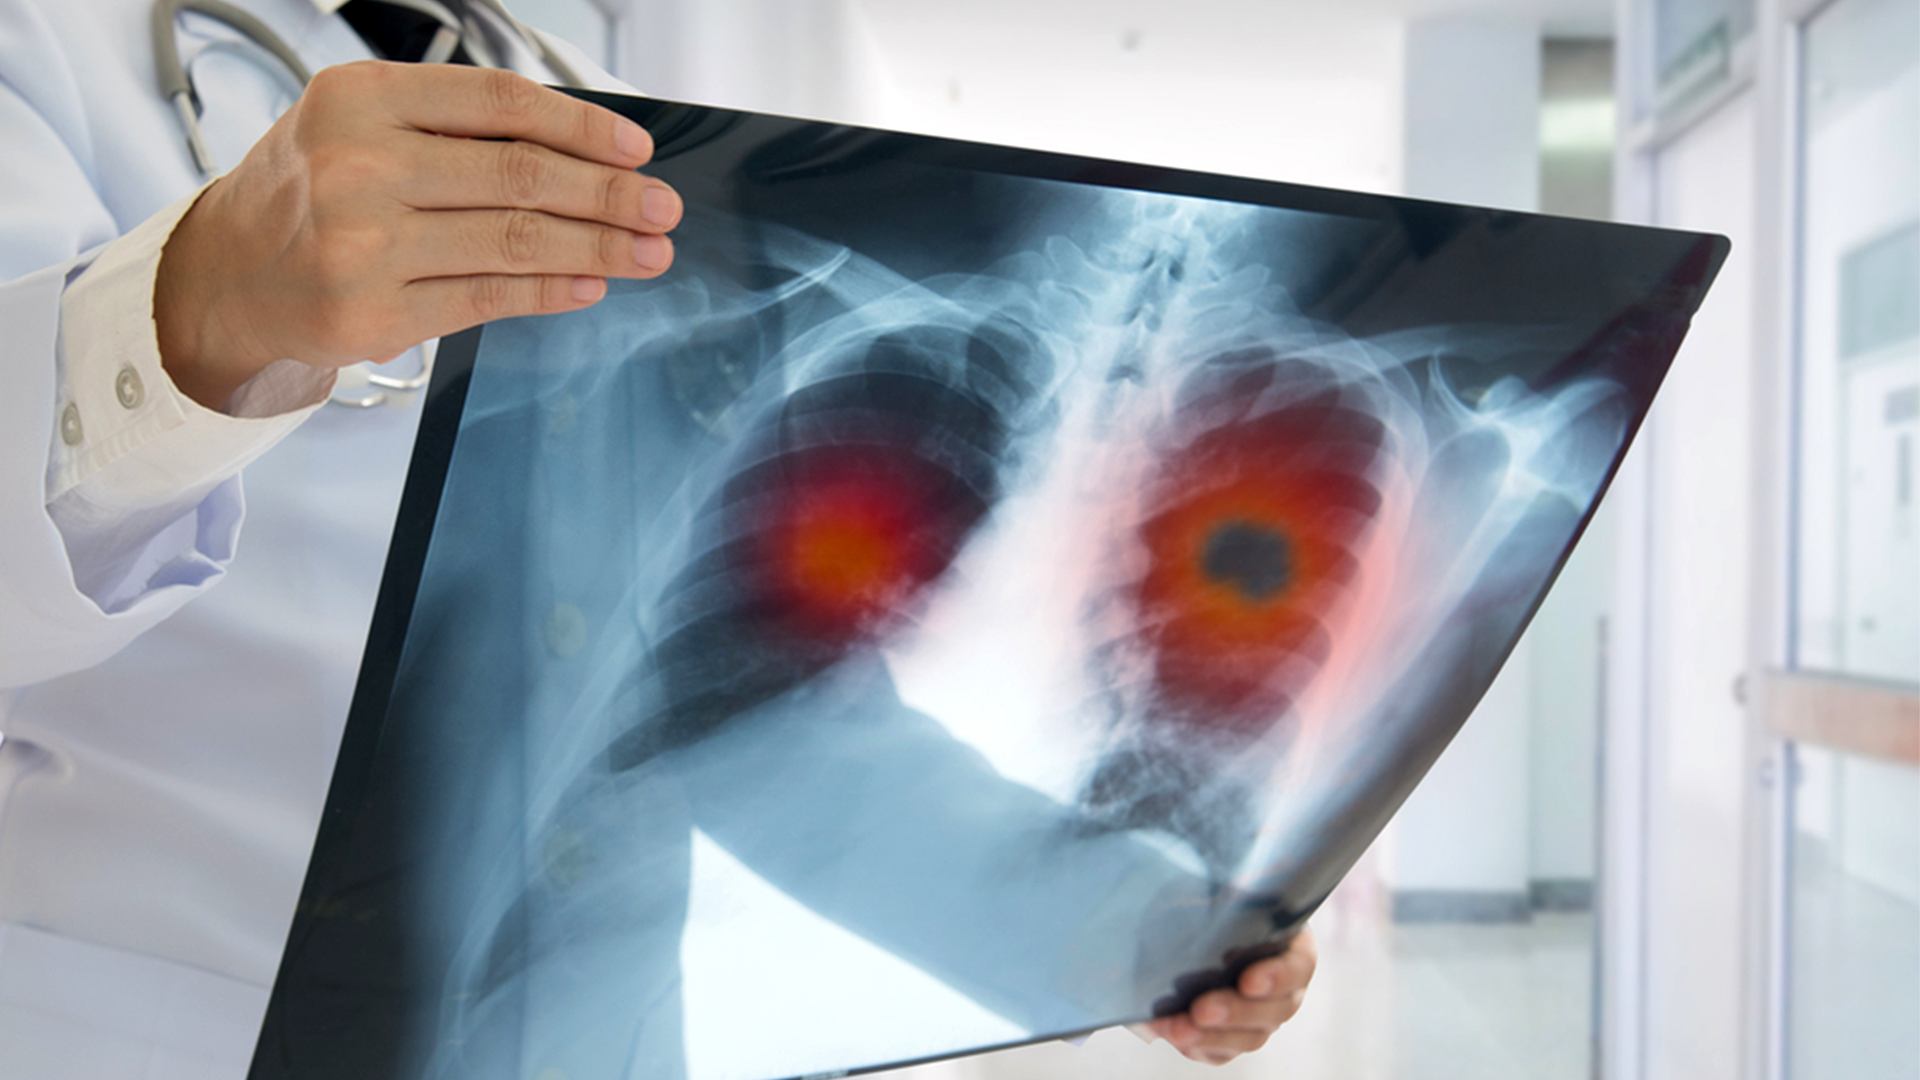 What Are The Types & Precautions For Lung Cancer?